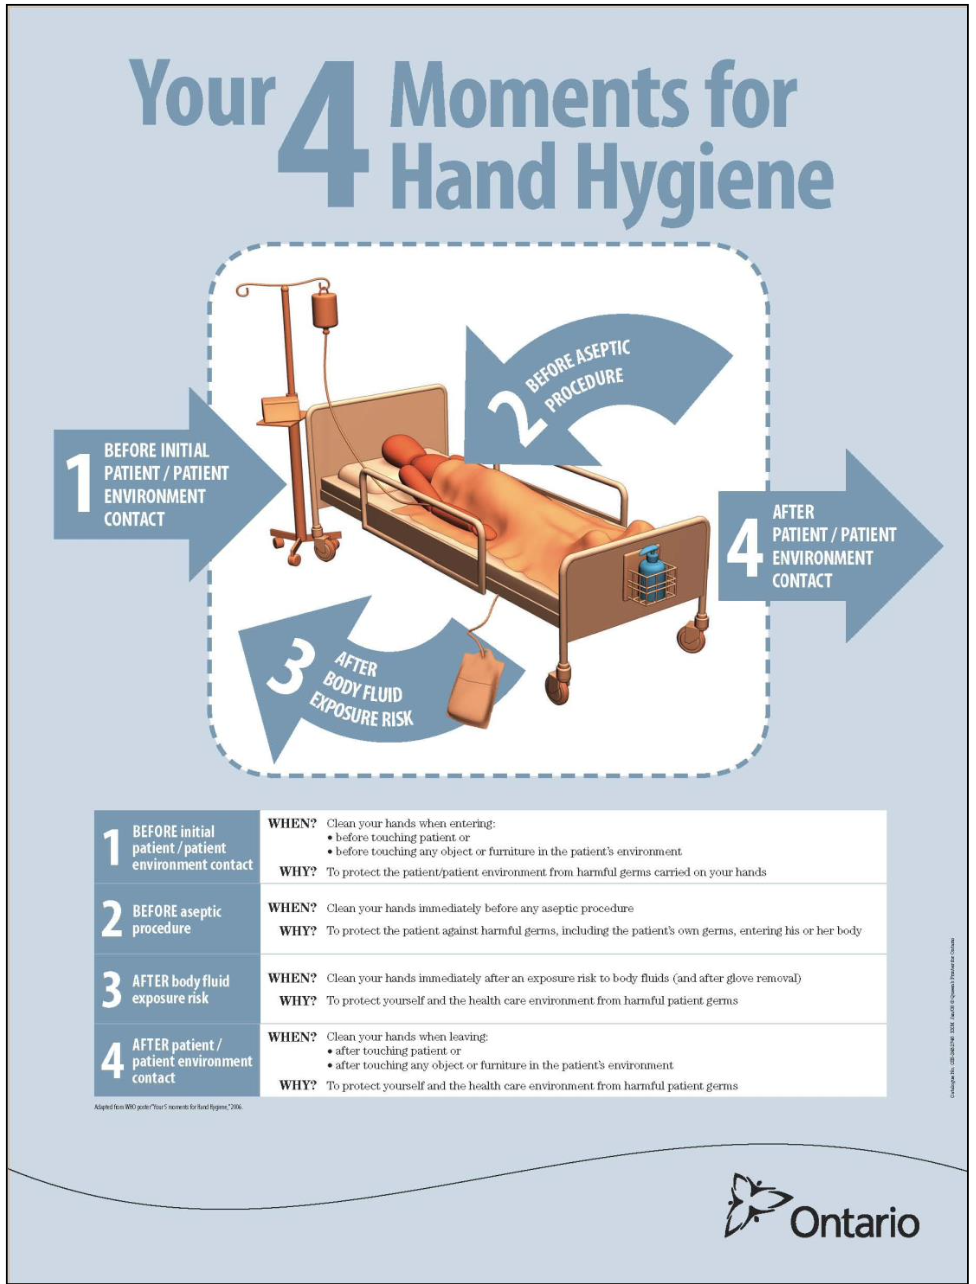 5 moments of hand hygiene in aged care